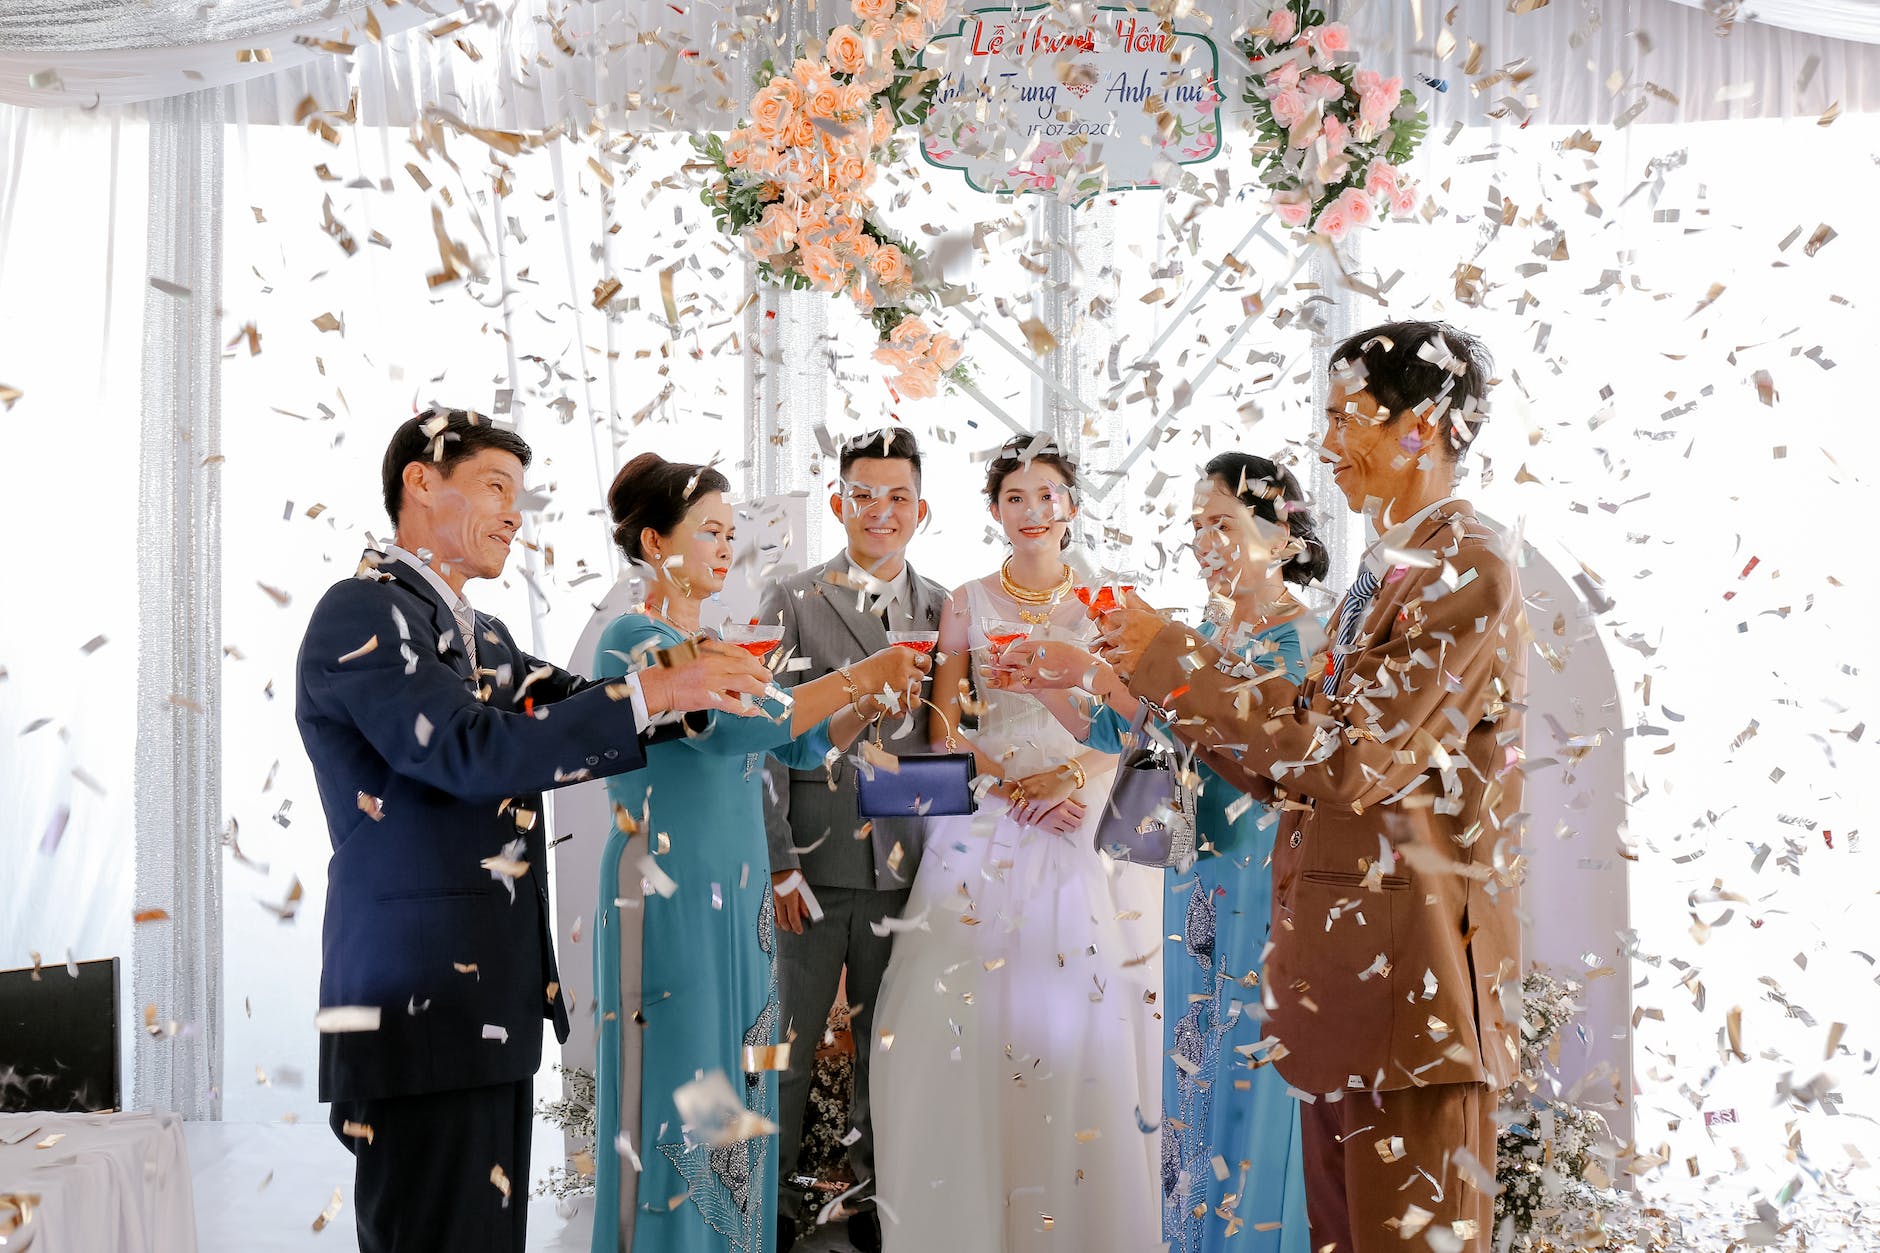 happy newlyweds with guests on wedding celebration